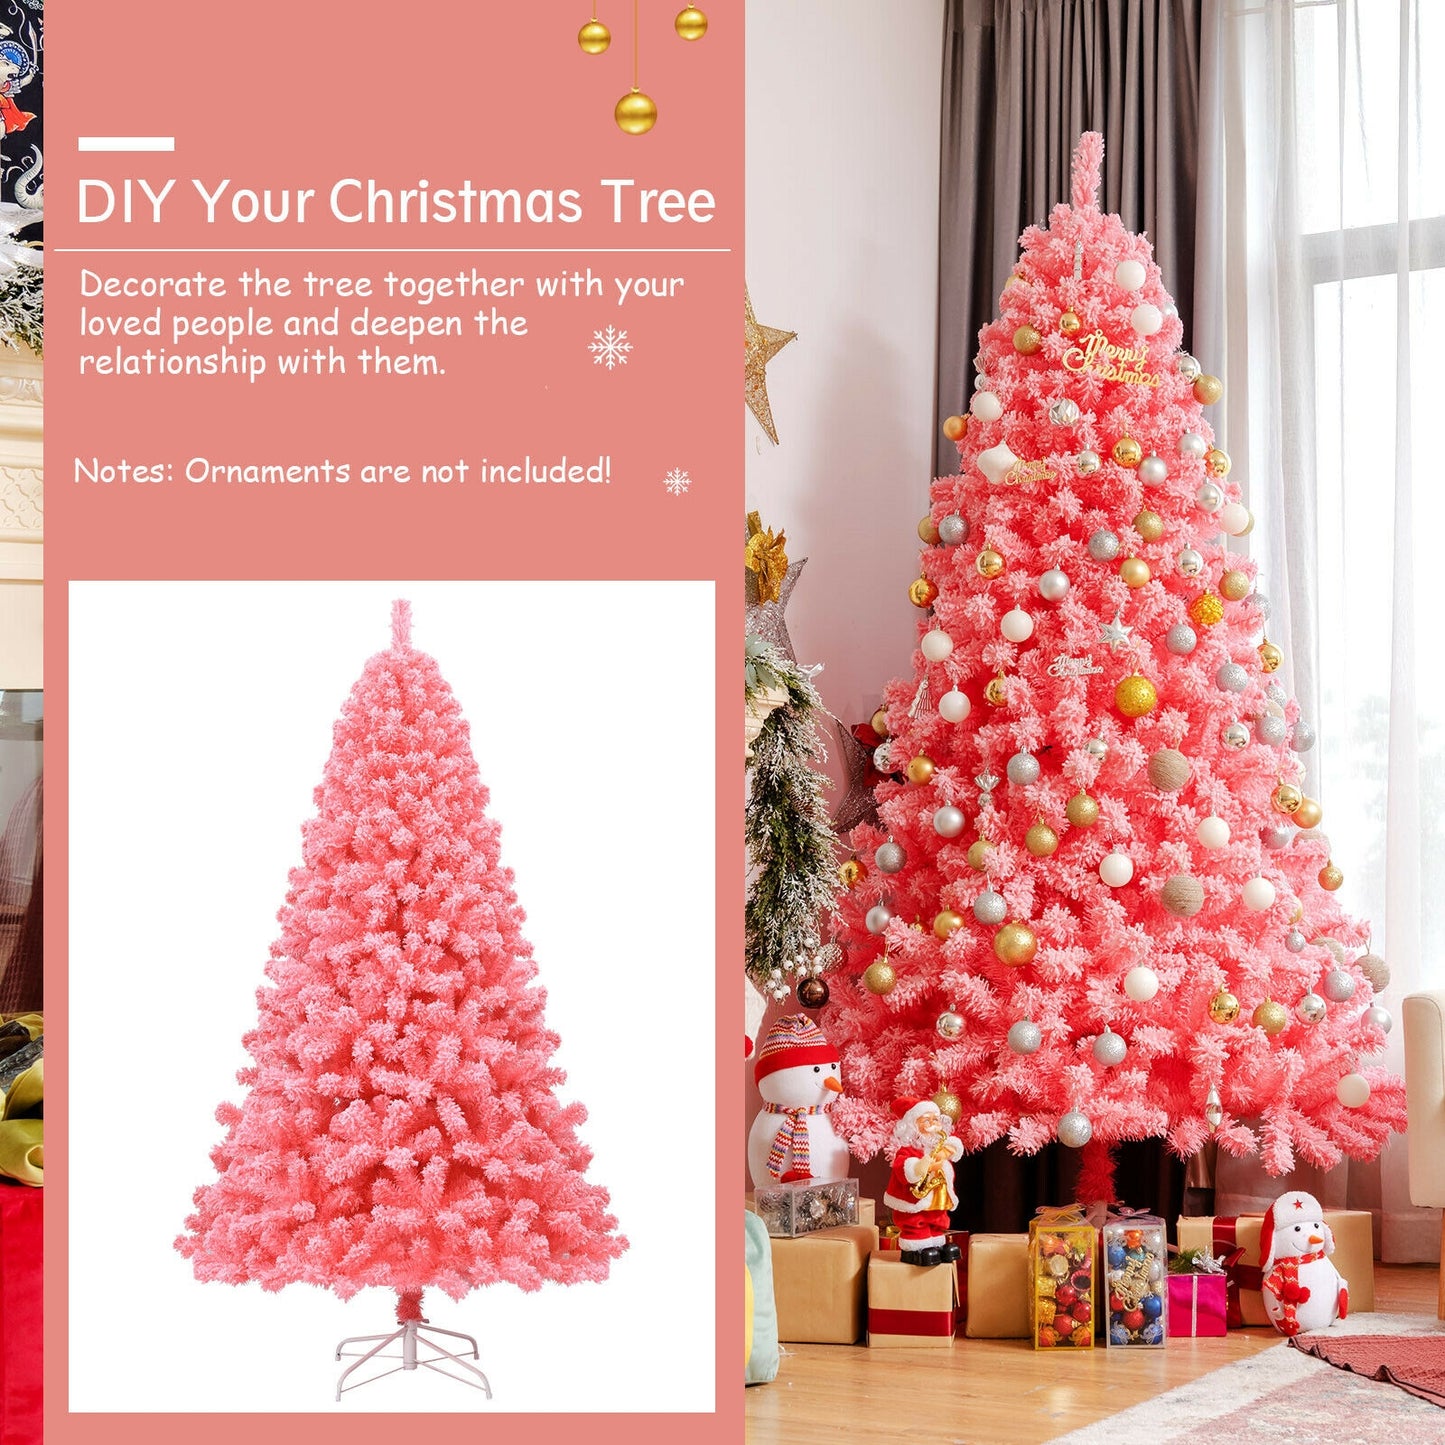 Pink Christmas Tree with Snow Flocked PVC Tips and Metal Stand-7.5 ft